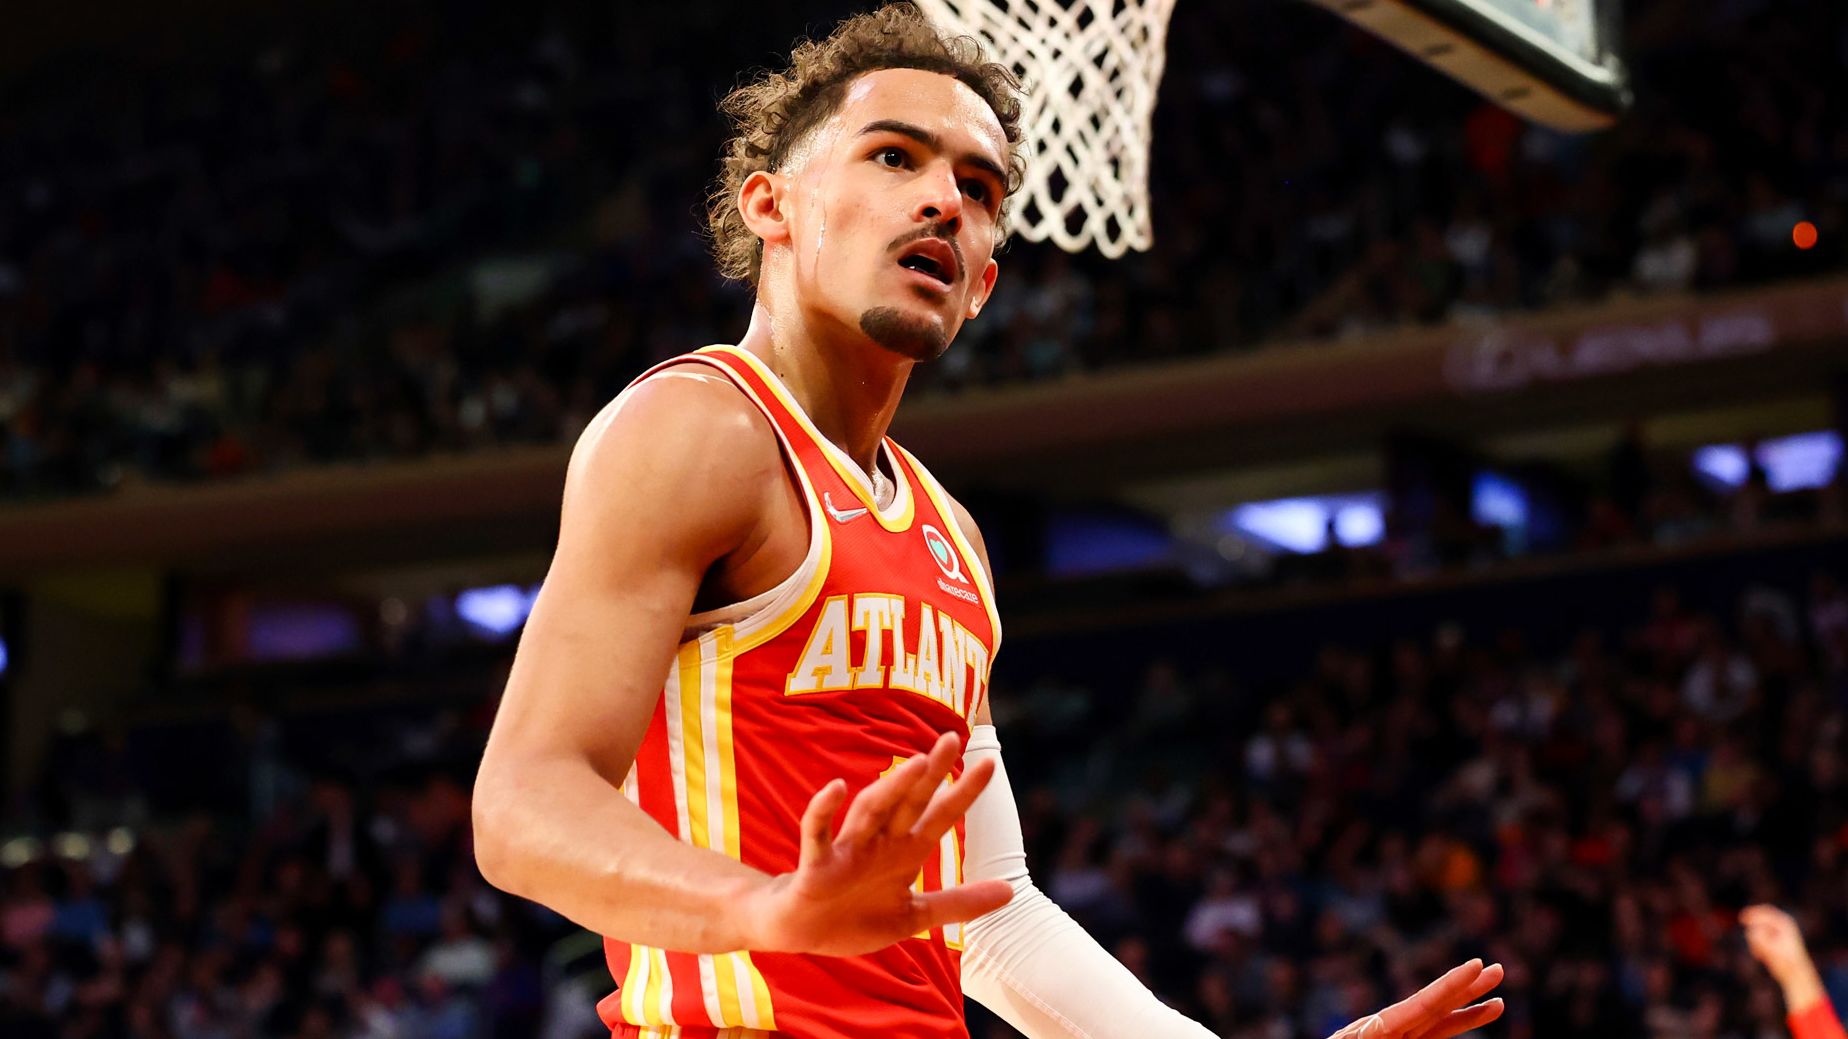 Trae Young motions to the crowd during the first half of the game against the New York Knicks.